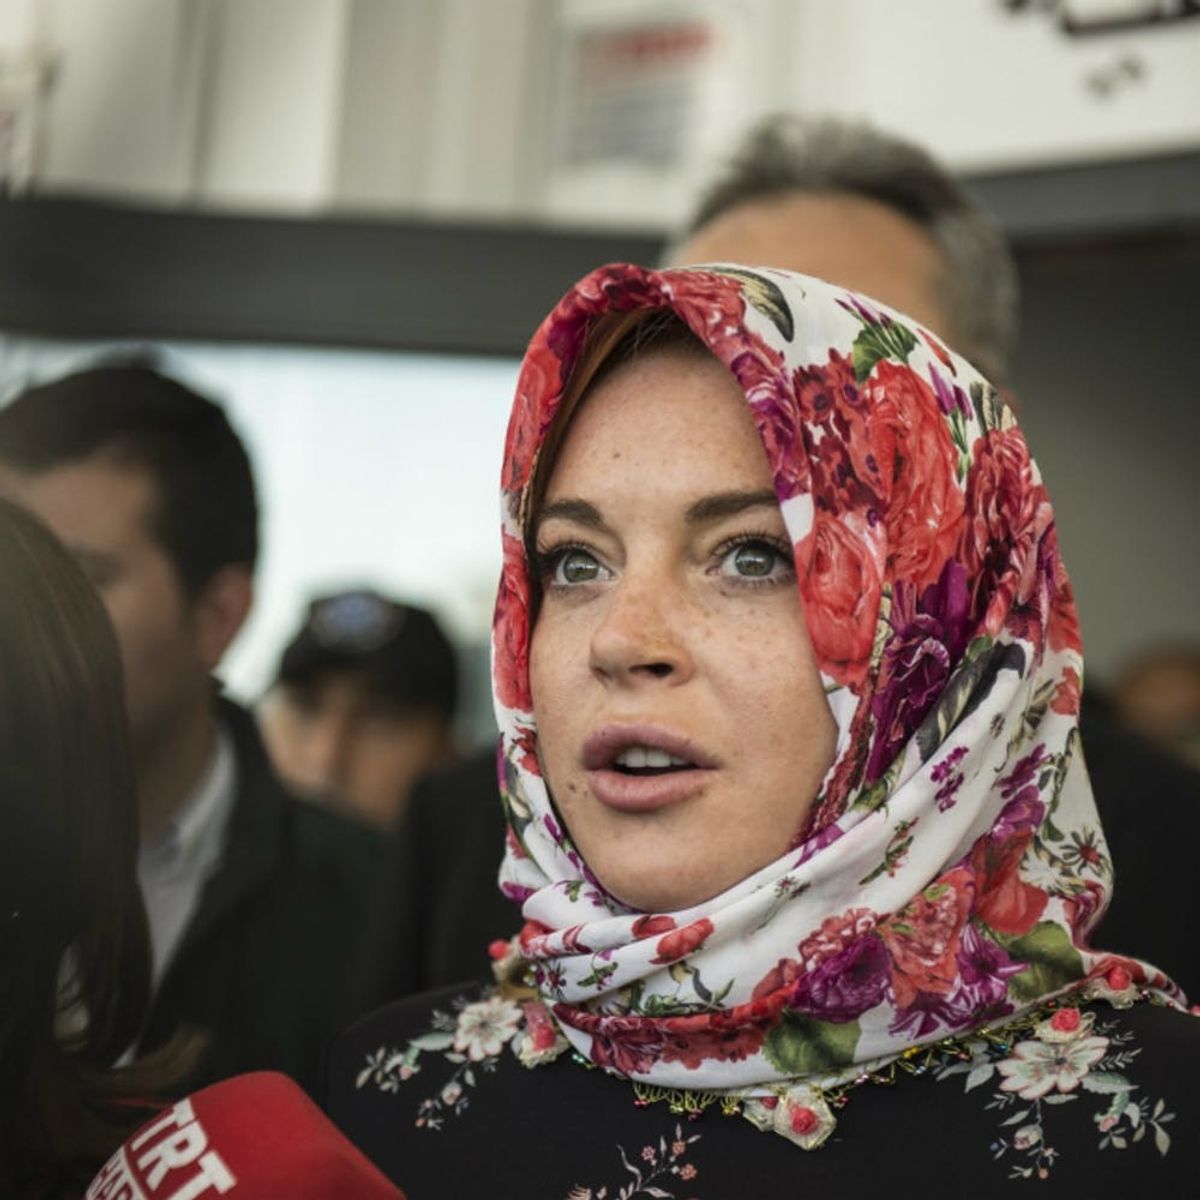 Lindsay Lohan Says She Was “Racially Profiled” for Wearing a Headscarf